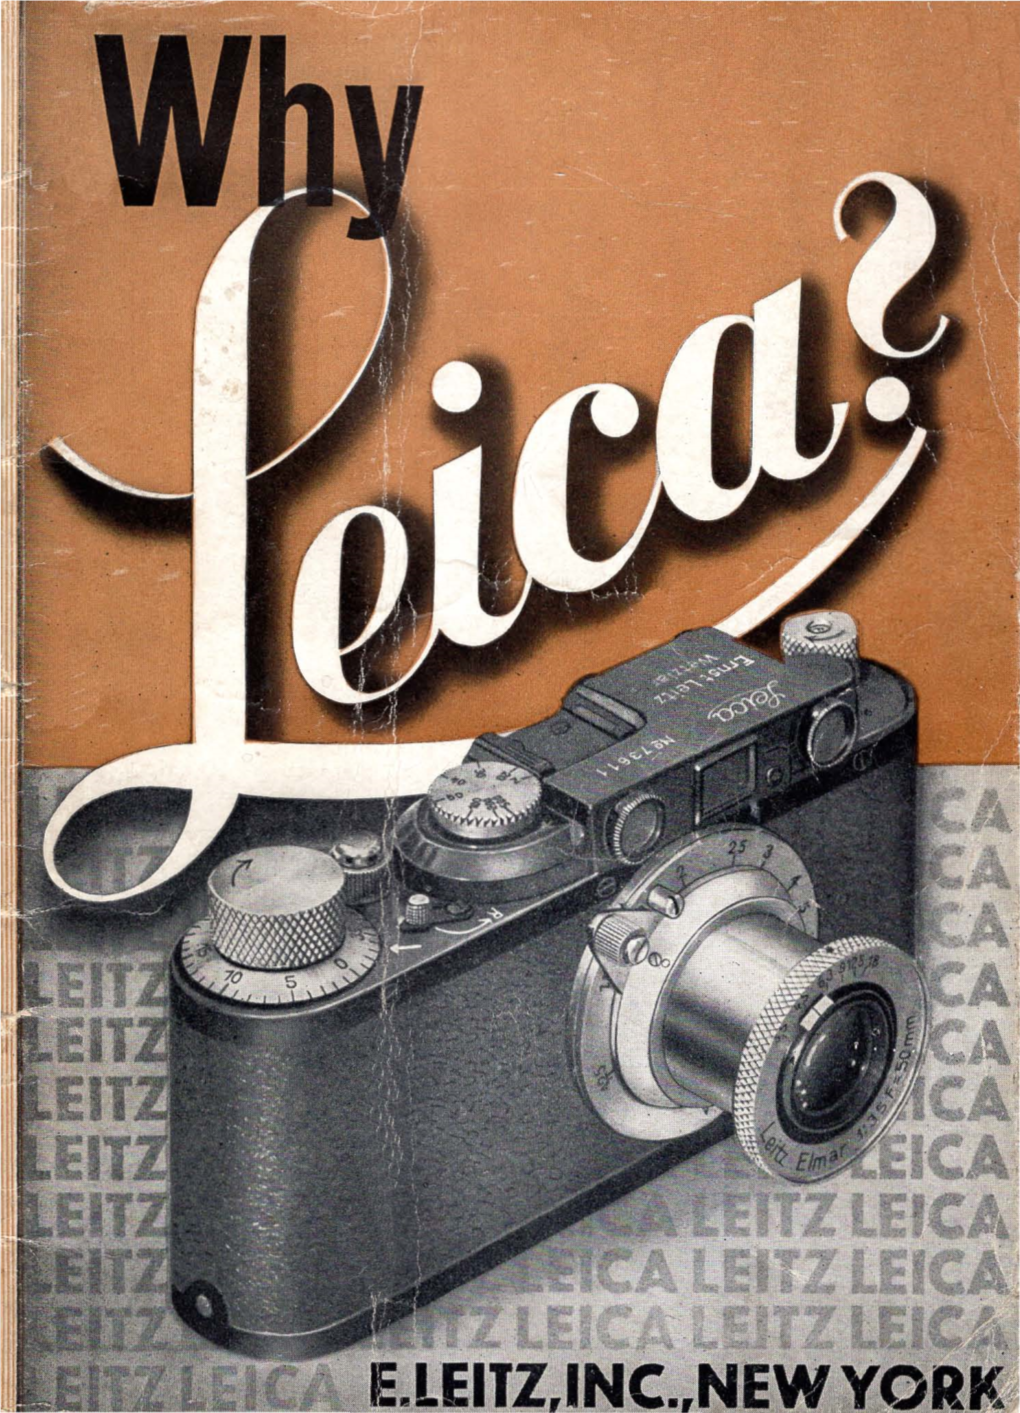 The LEICA Camera Becomes First Choice for Such a Weighing of Facts